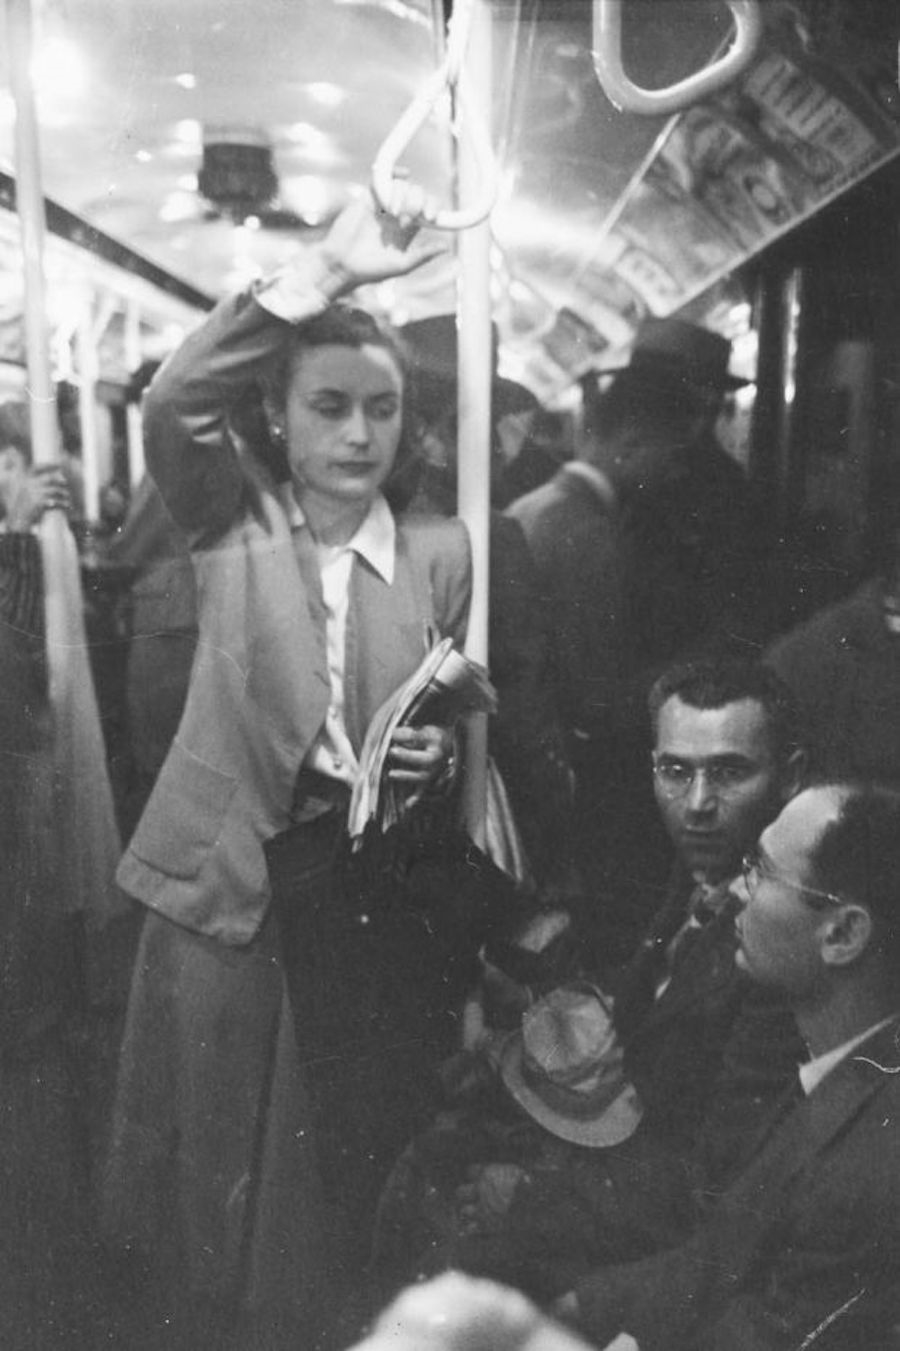 Archisearch SEE THE 1940's NEW YORK CITY THROUGH THE LENS OF A 17-YEAR-OLD STANLEY KUBRICK